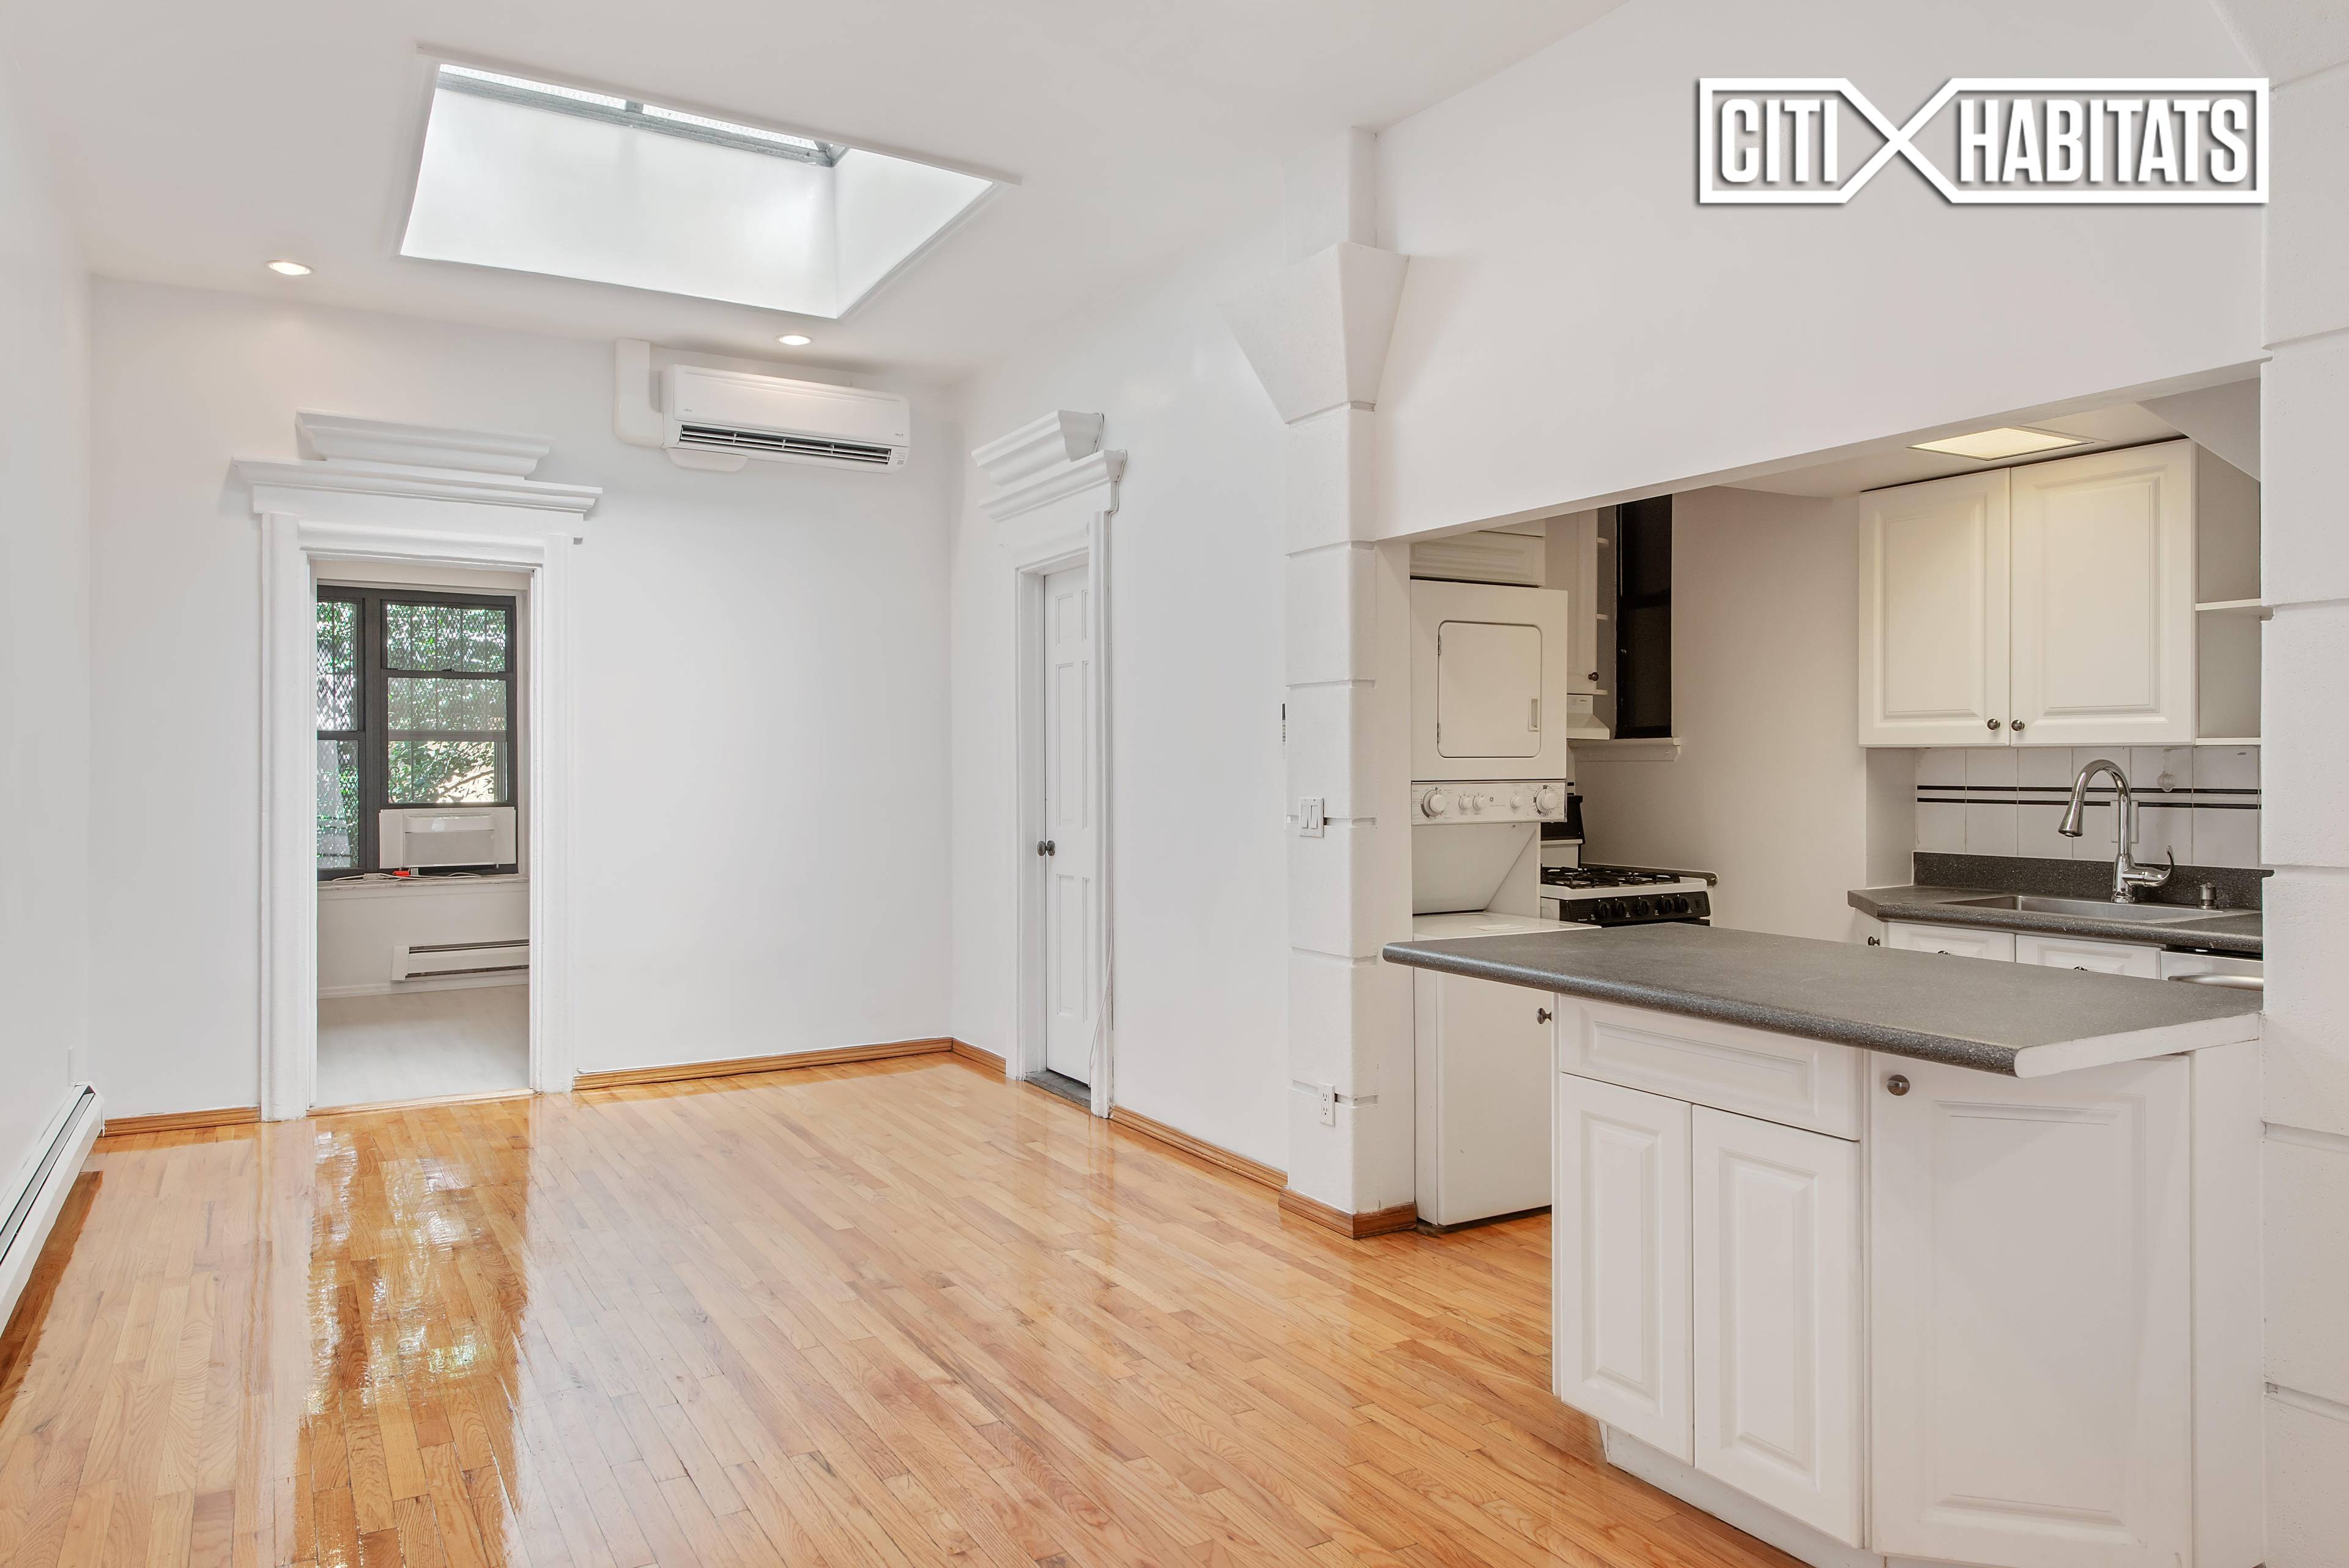 This rarely available and recently renovated two bedroom apartment located in Gramercy is waiting for you.